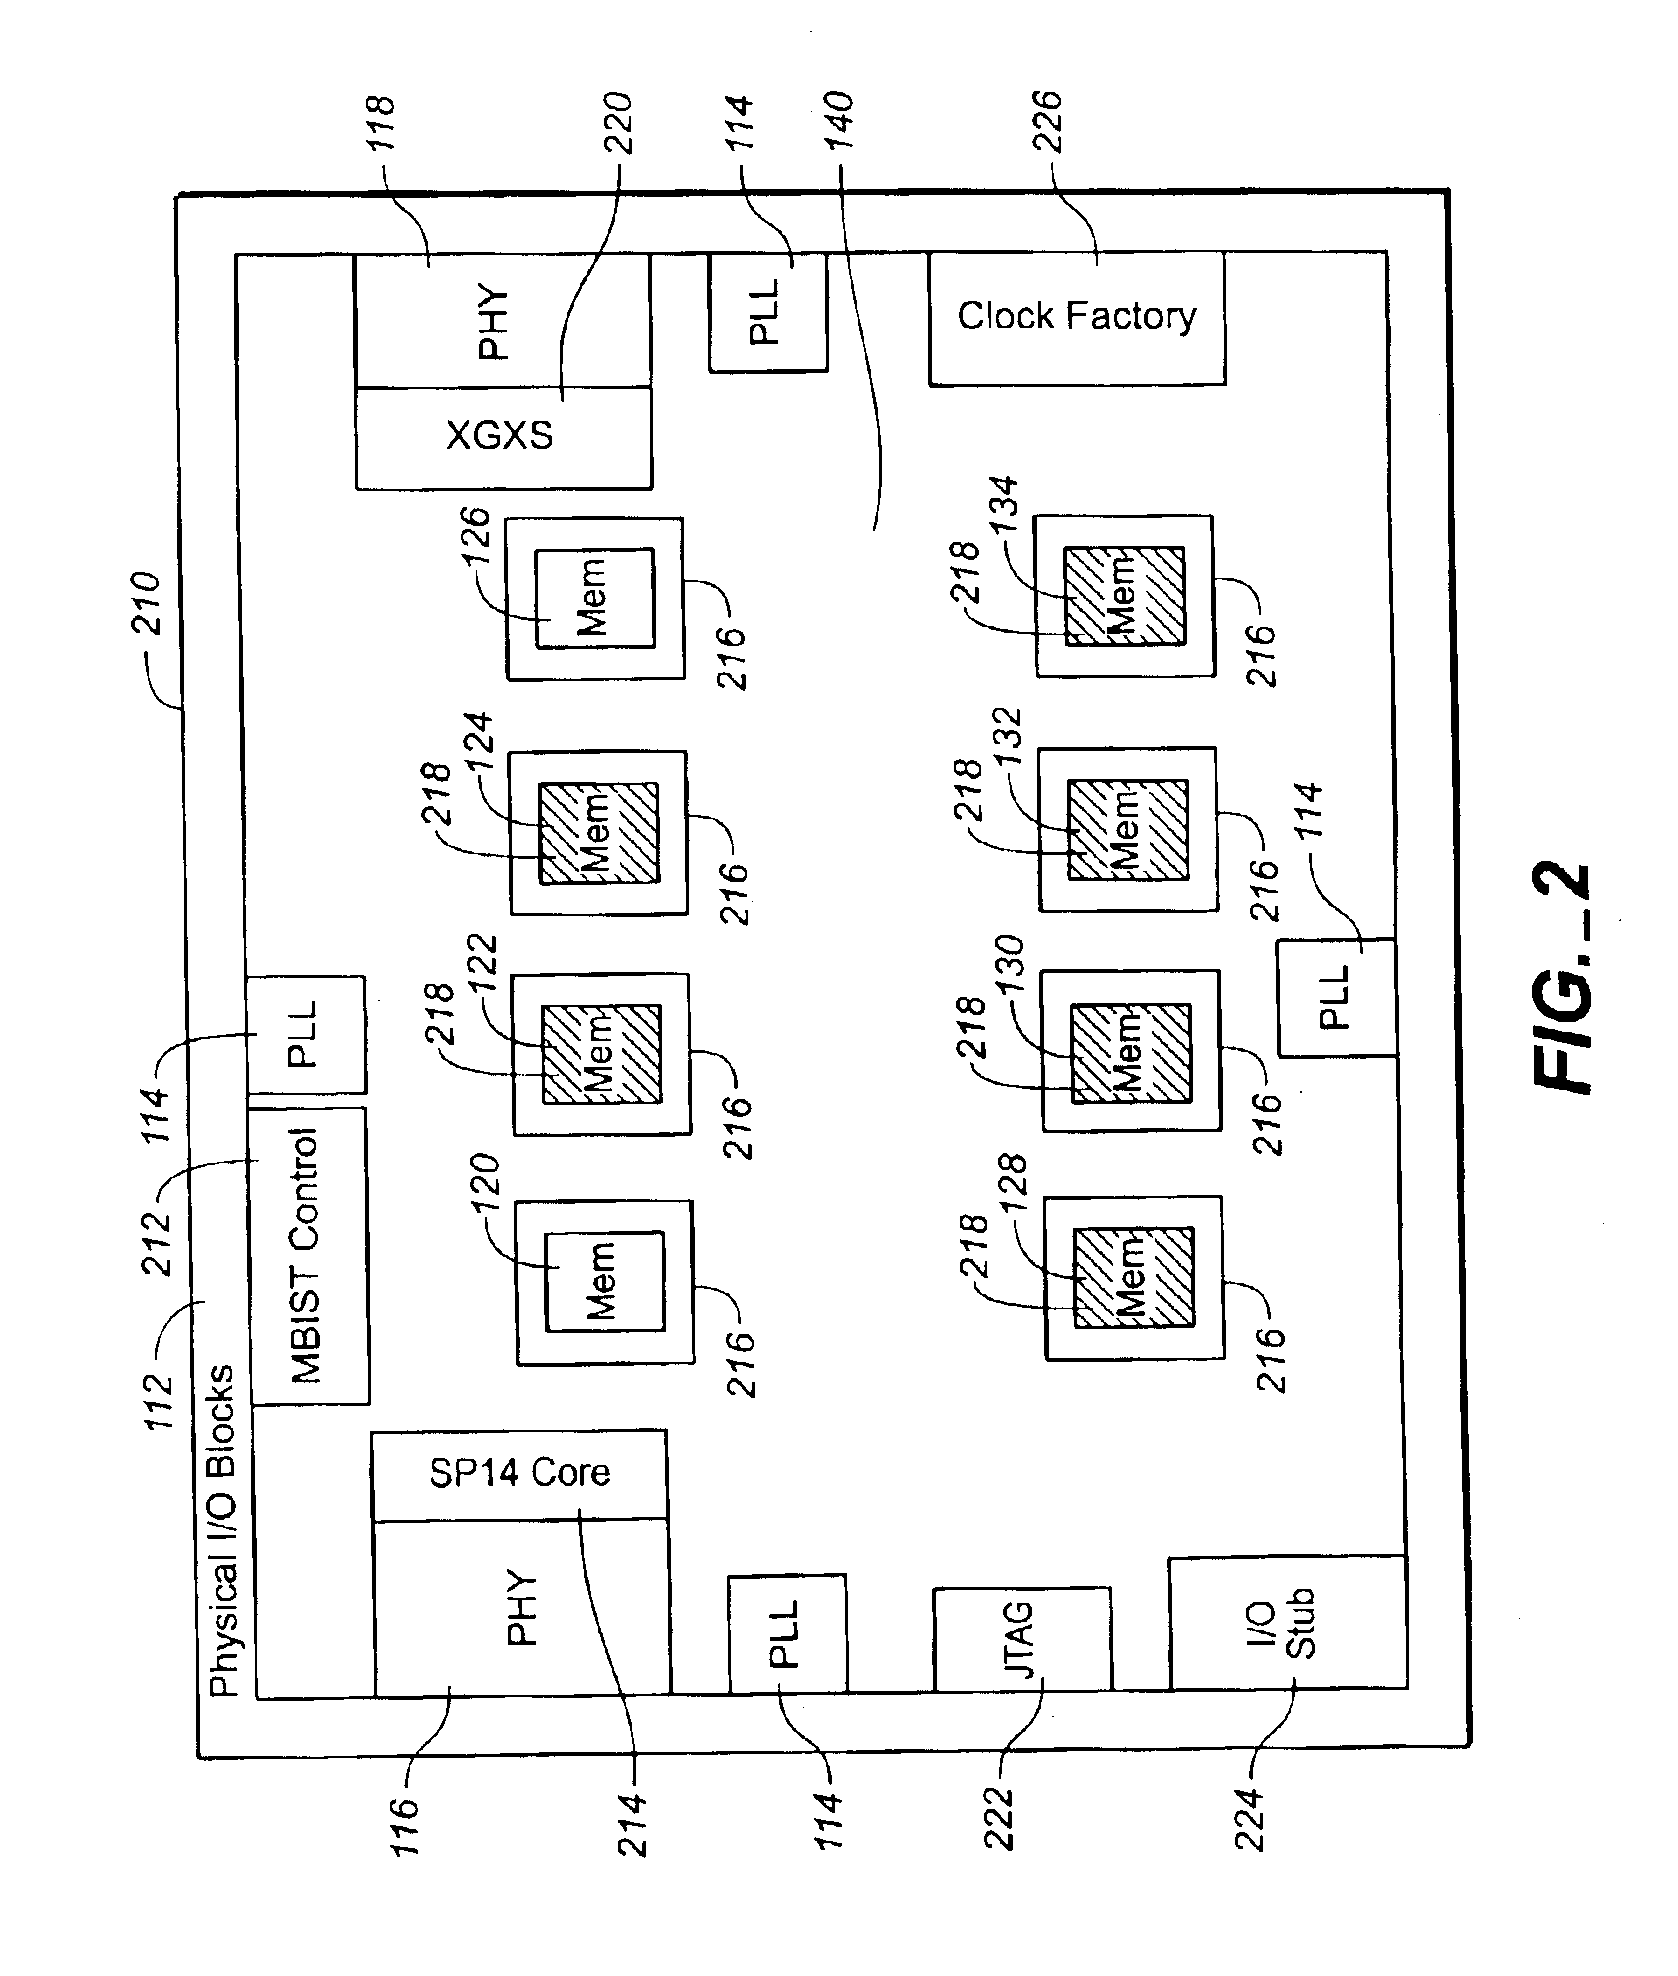 Automated selection and placement of memory during design of an integrated circuit